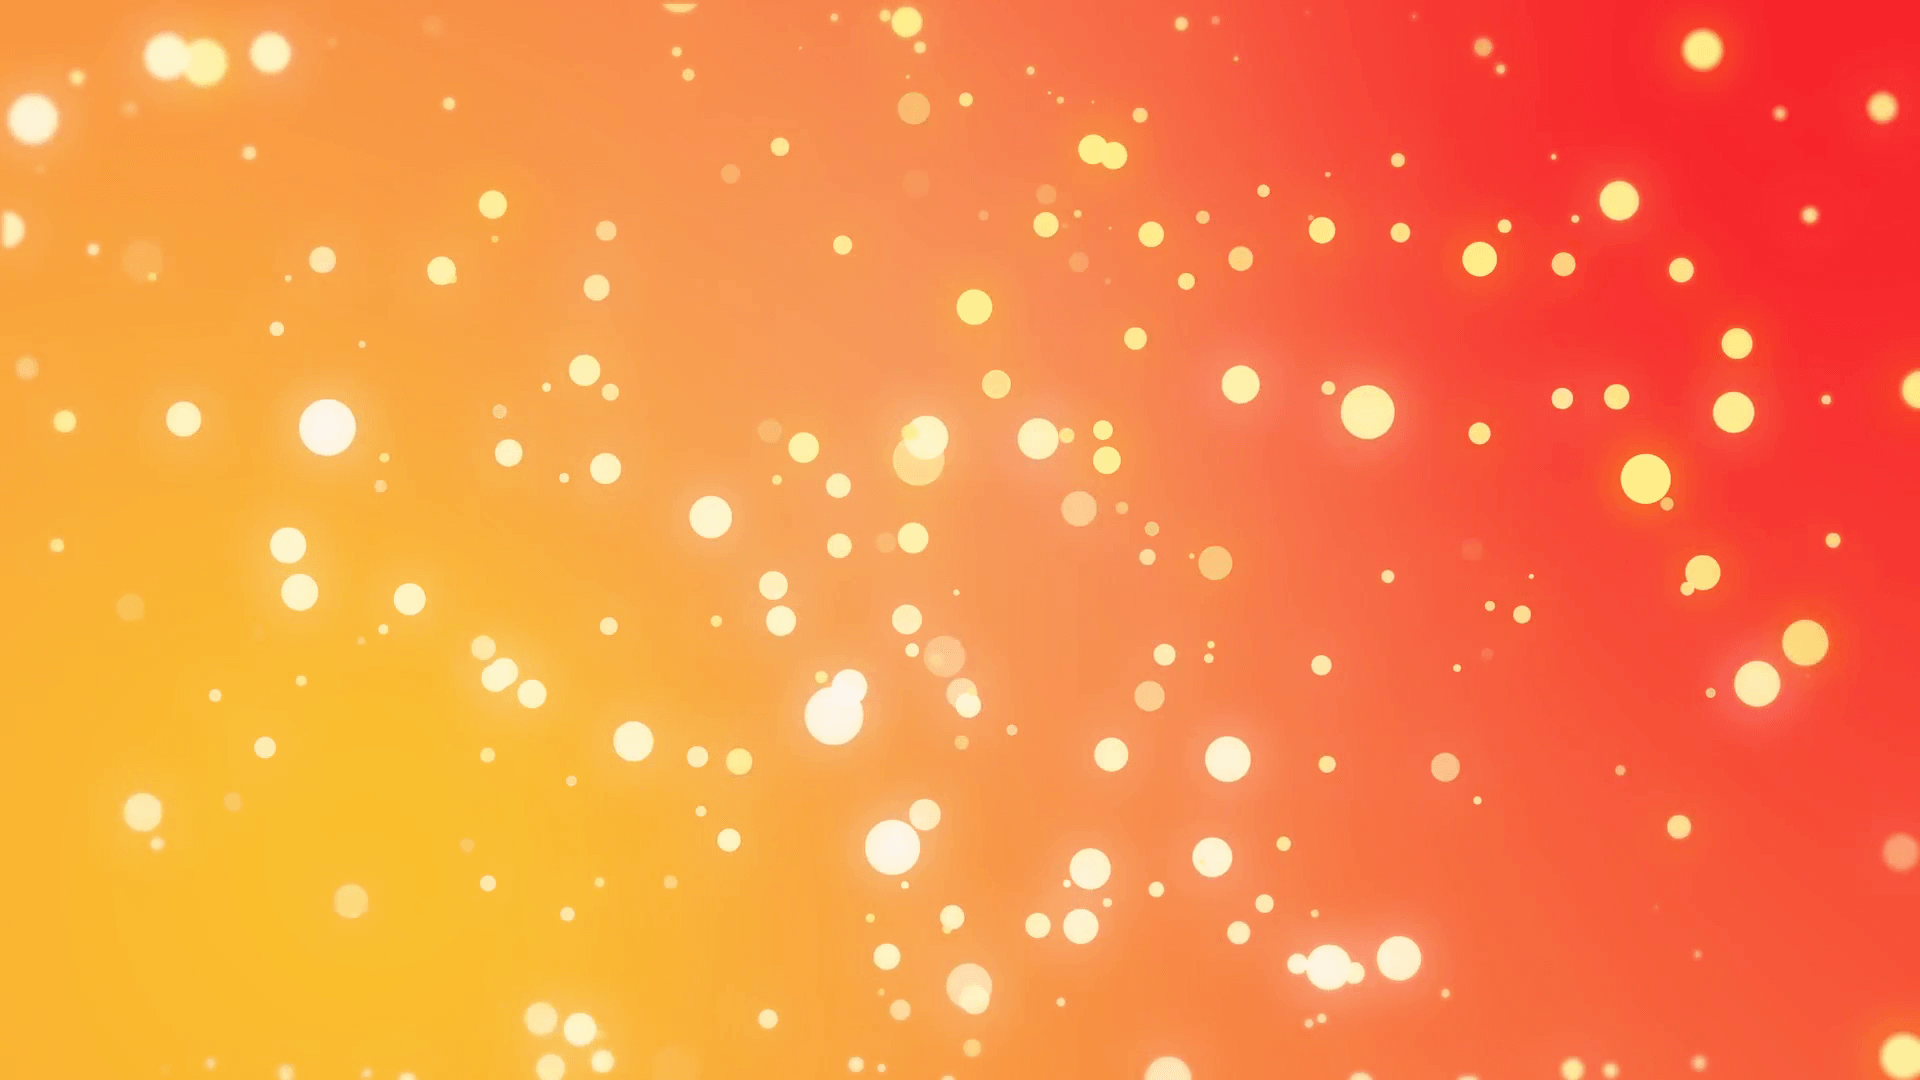 Sparkly light particles moving across a yellow orange red gradient